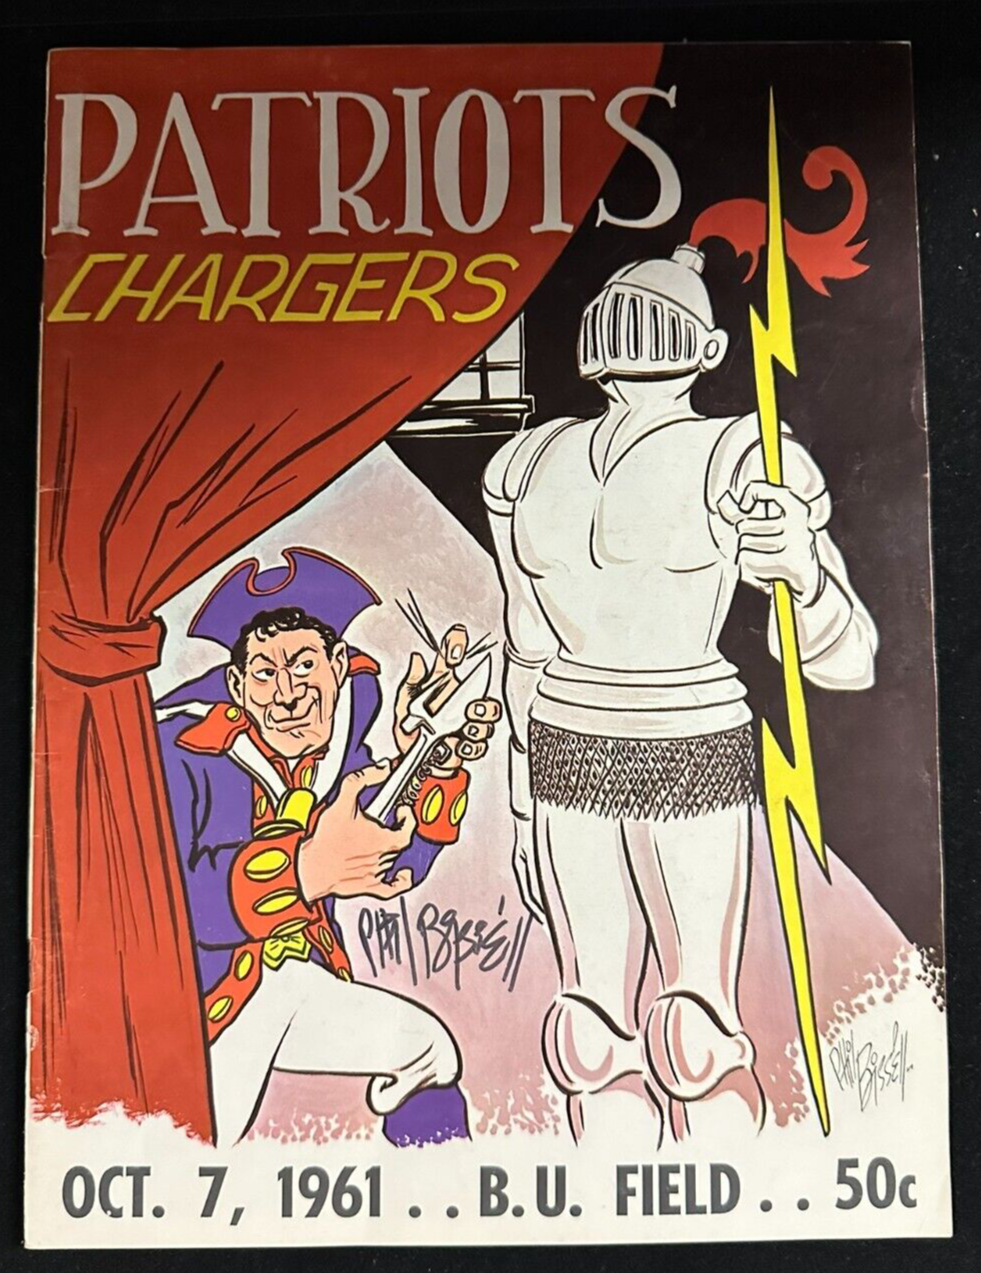 Phil Bissell Autographed Oct 7, 1961 Boston Patriots & Chargers Program AFL